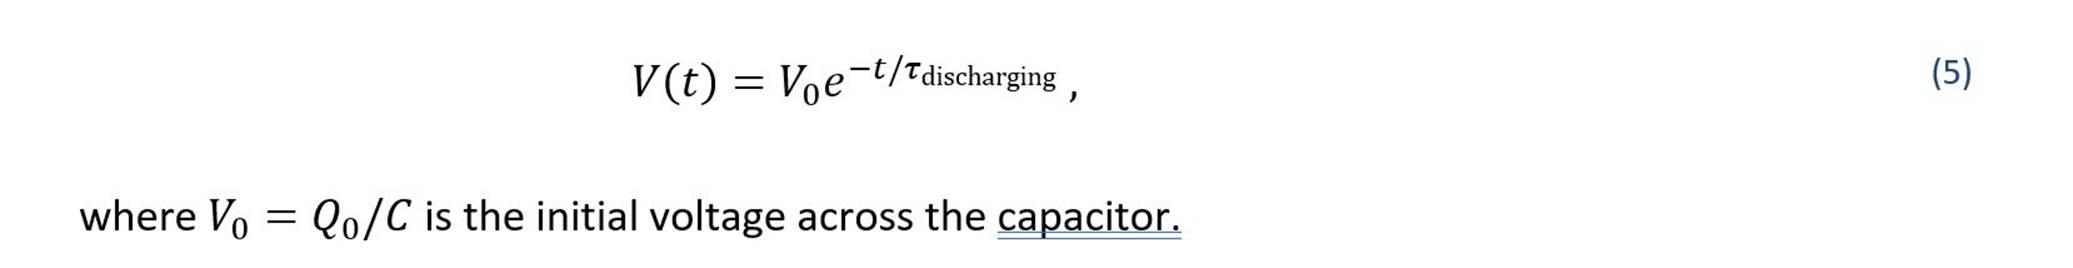 where Vo = V(t) = Voe-t/discharging, Qo/C is the initial voltage across the capacitor. (5)